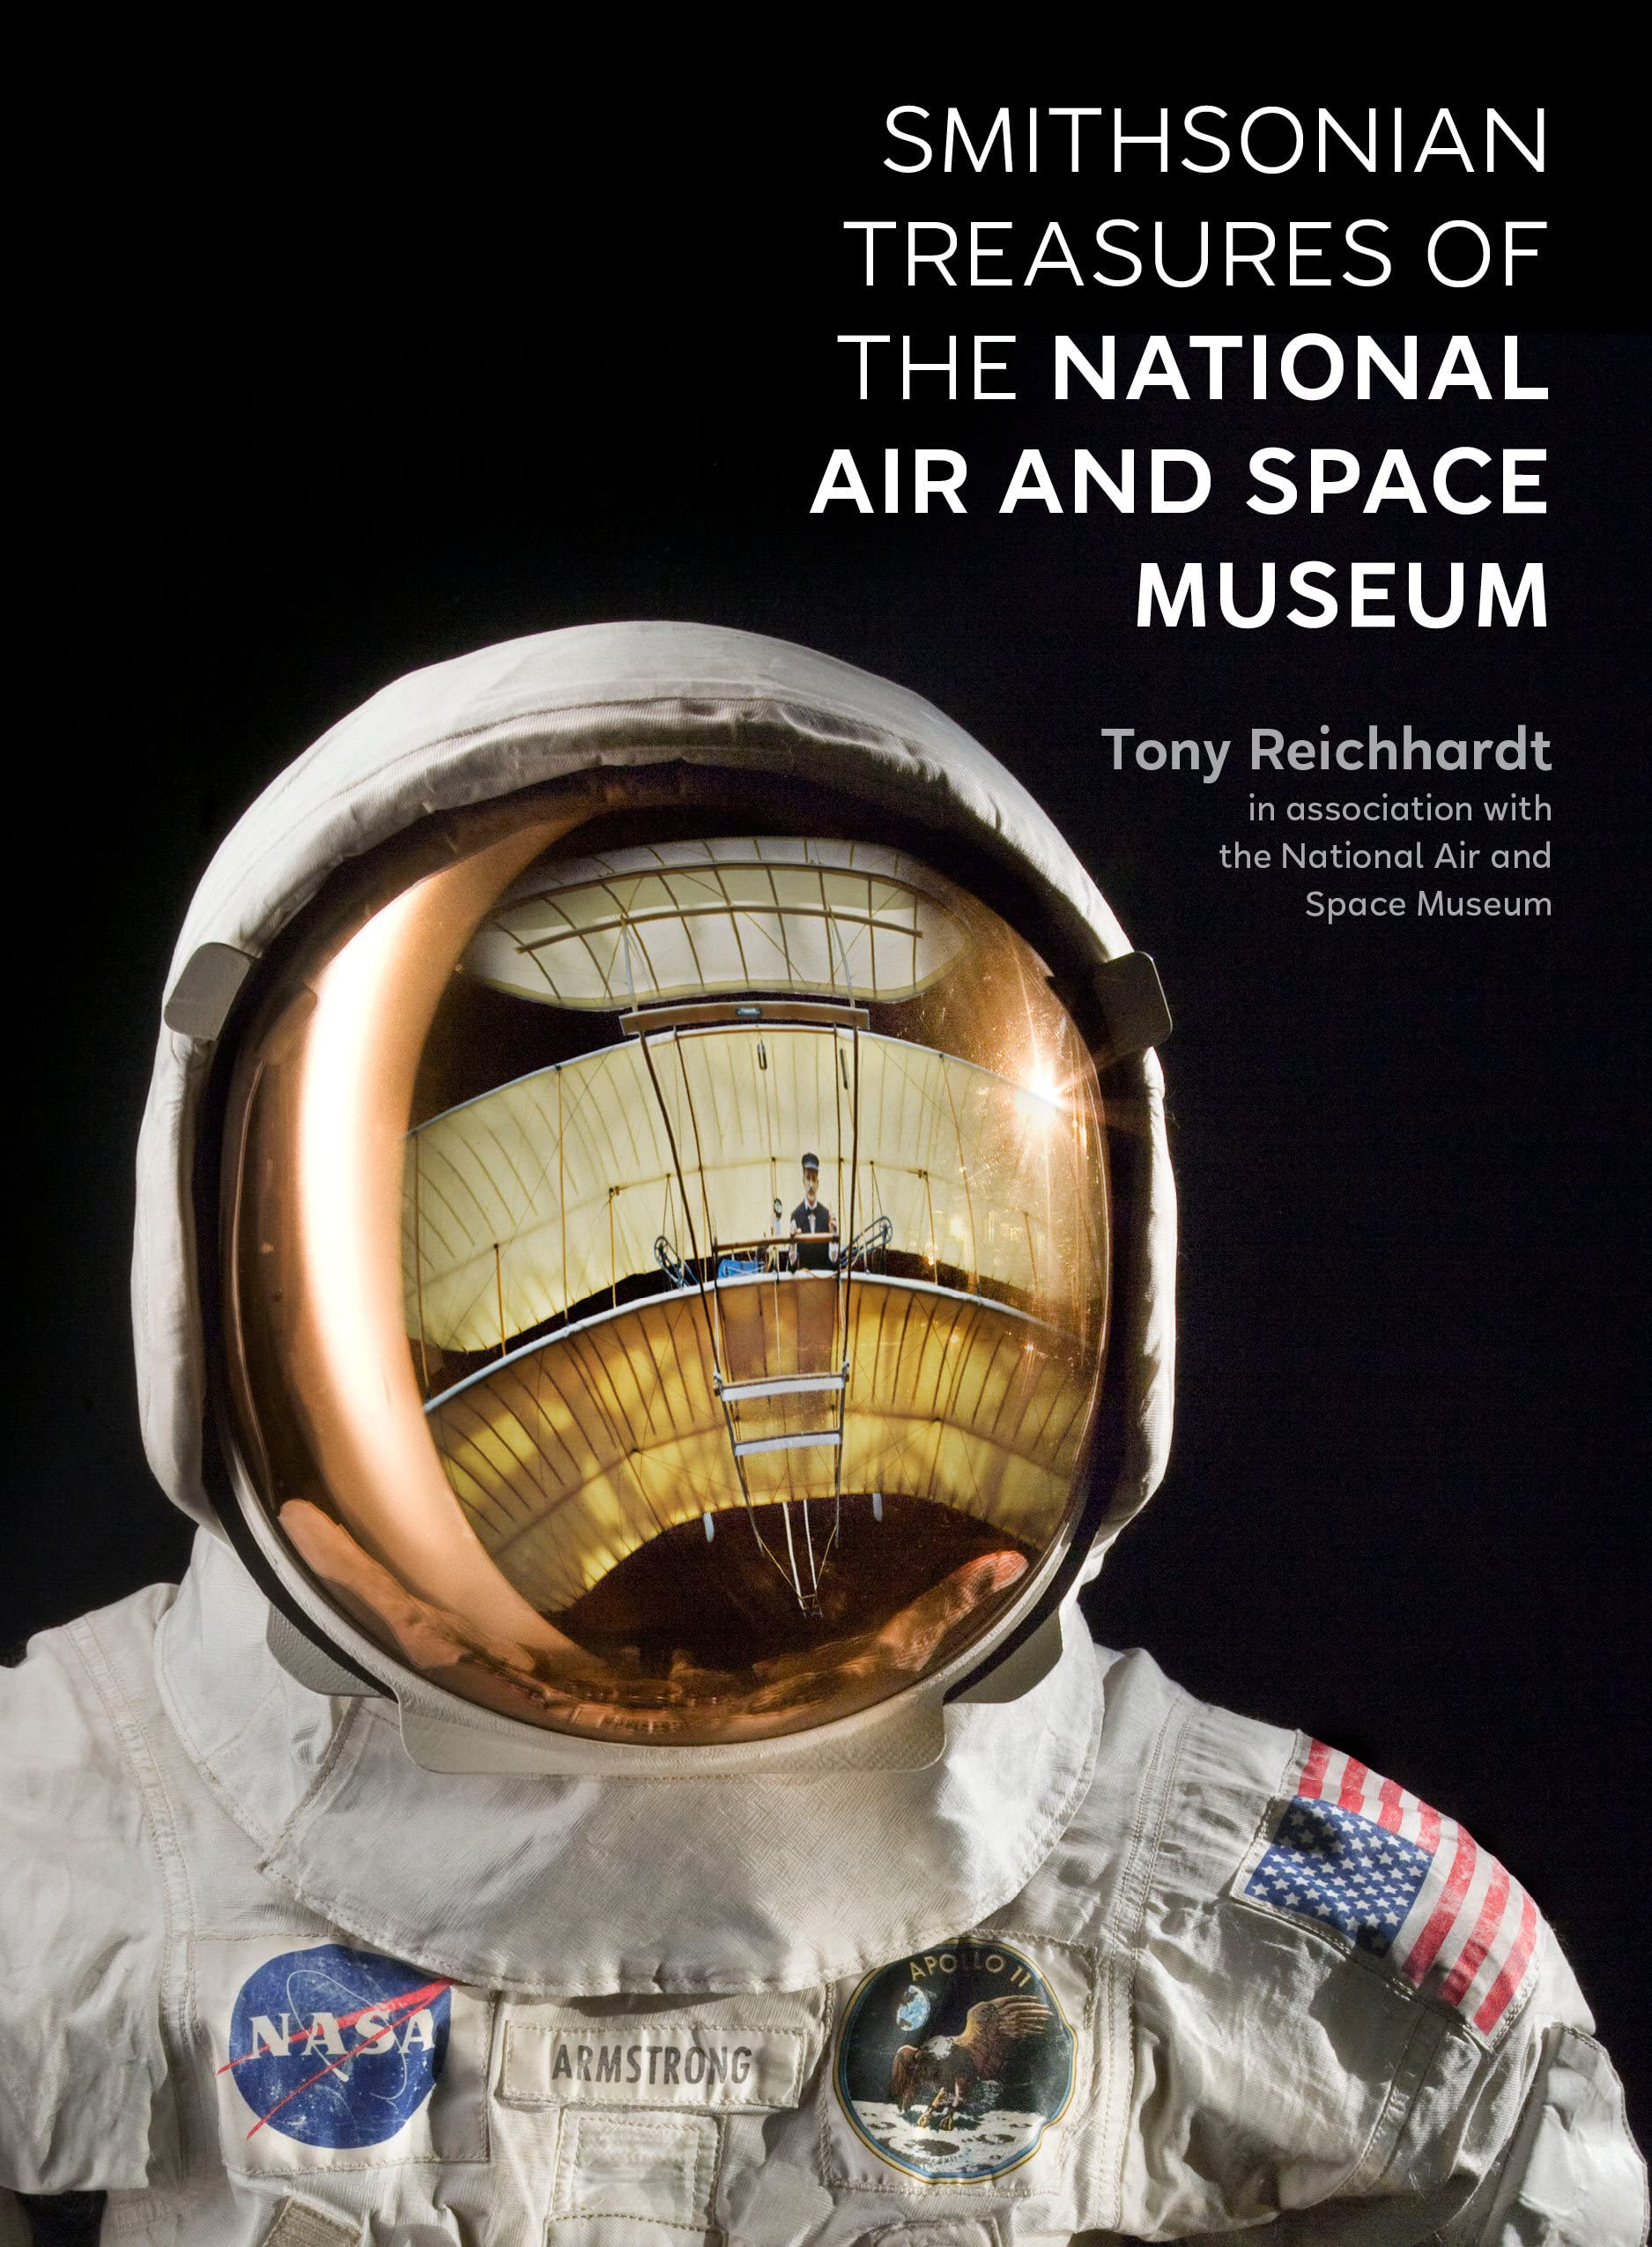 Smithsonian Treasure of the Natioal Air and Space Museum | Tony Reichhardt